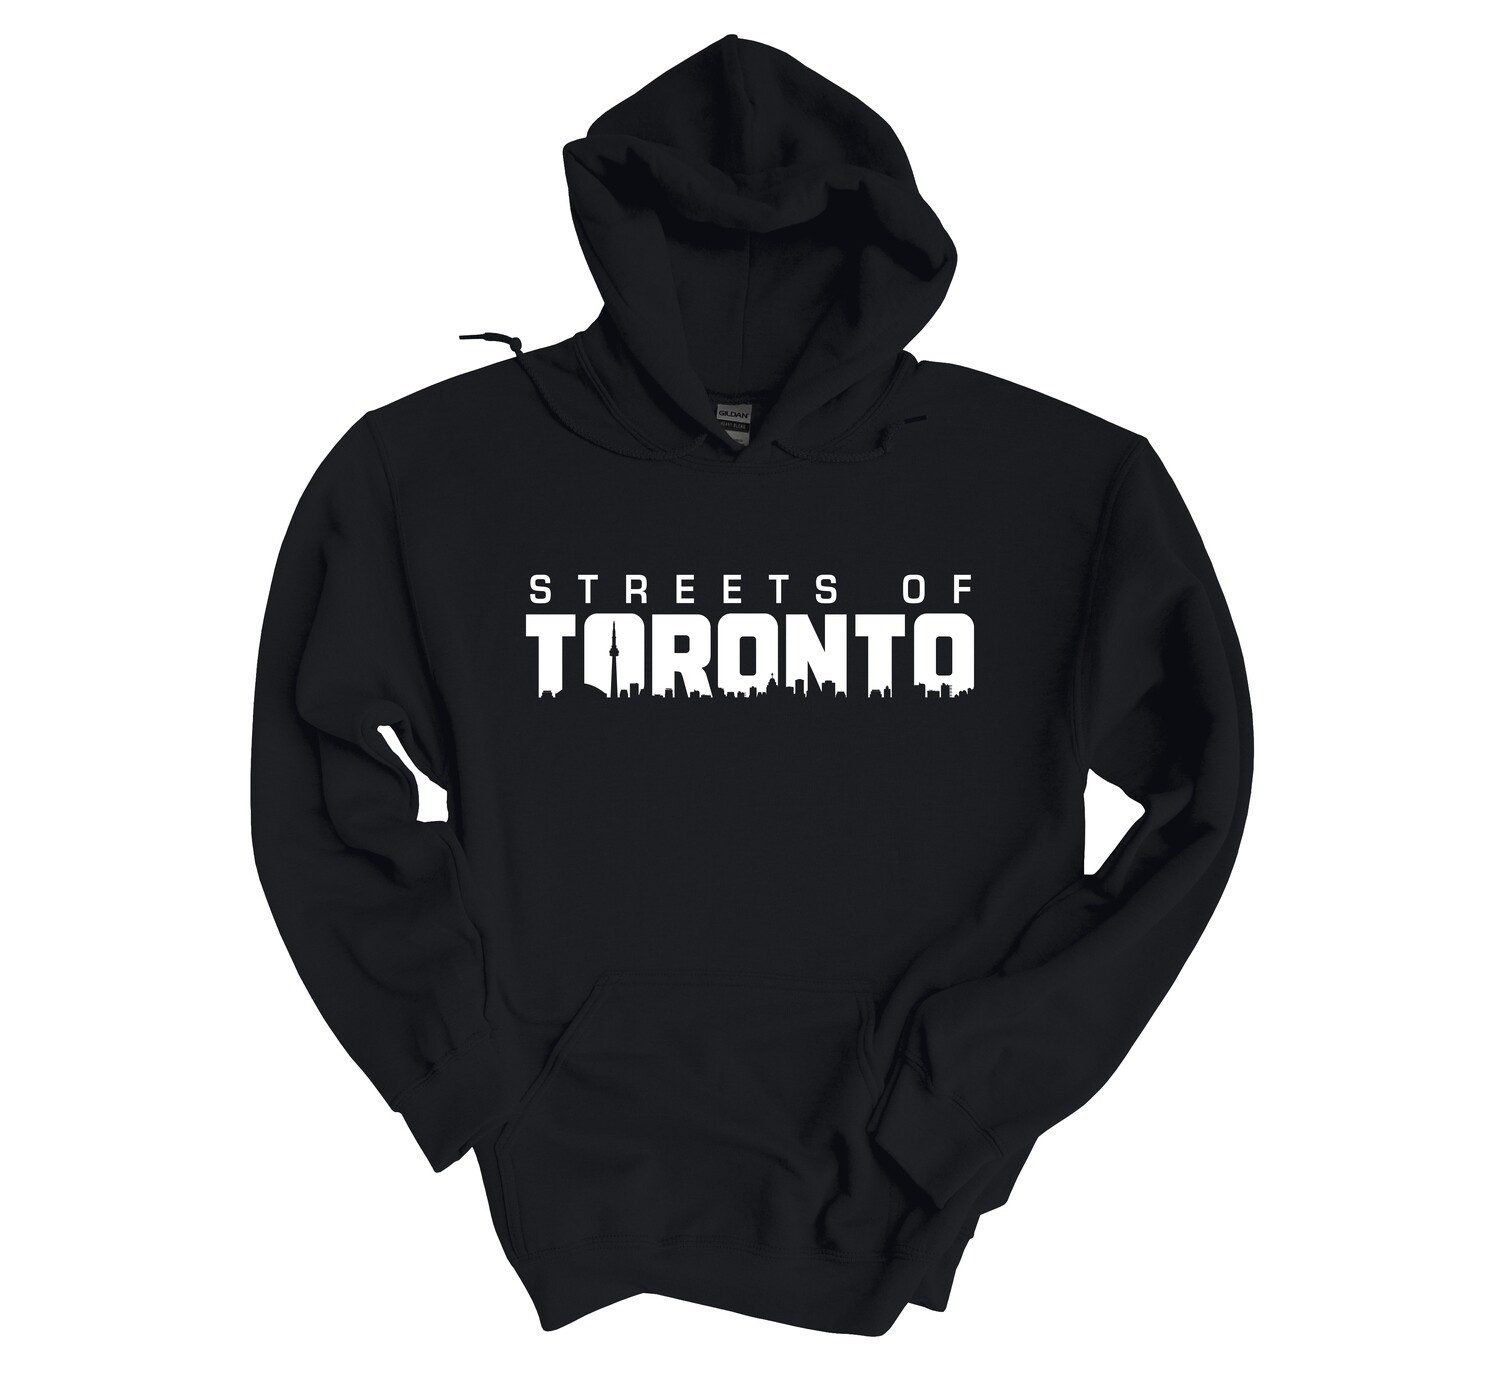 The SOT Classic Hoodie in Black